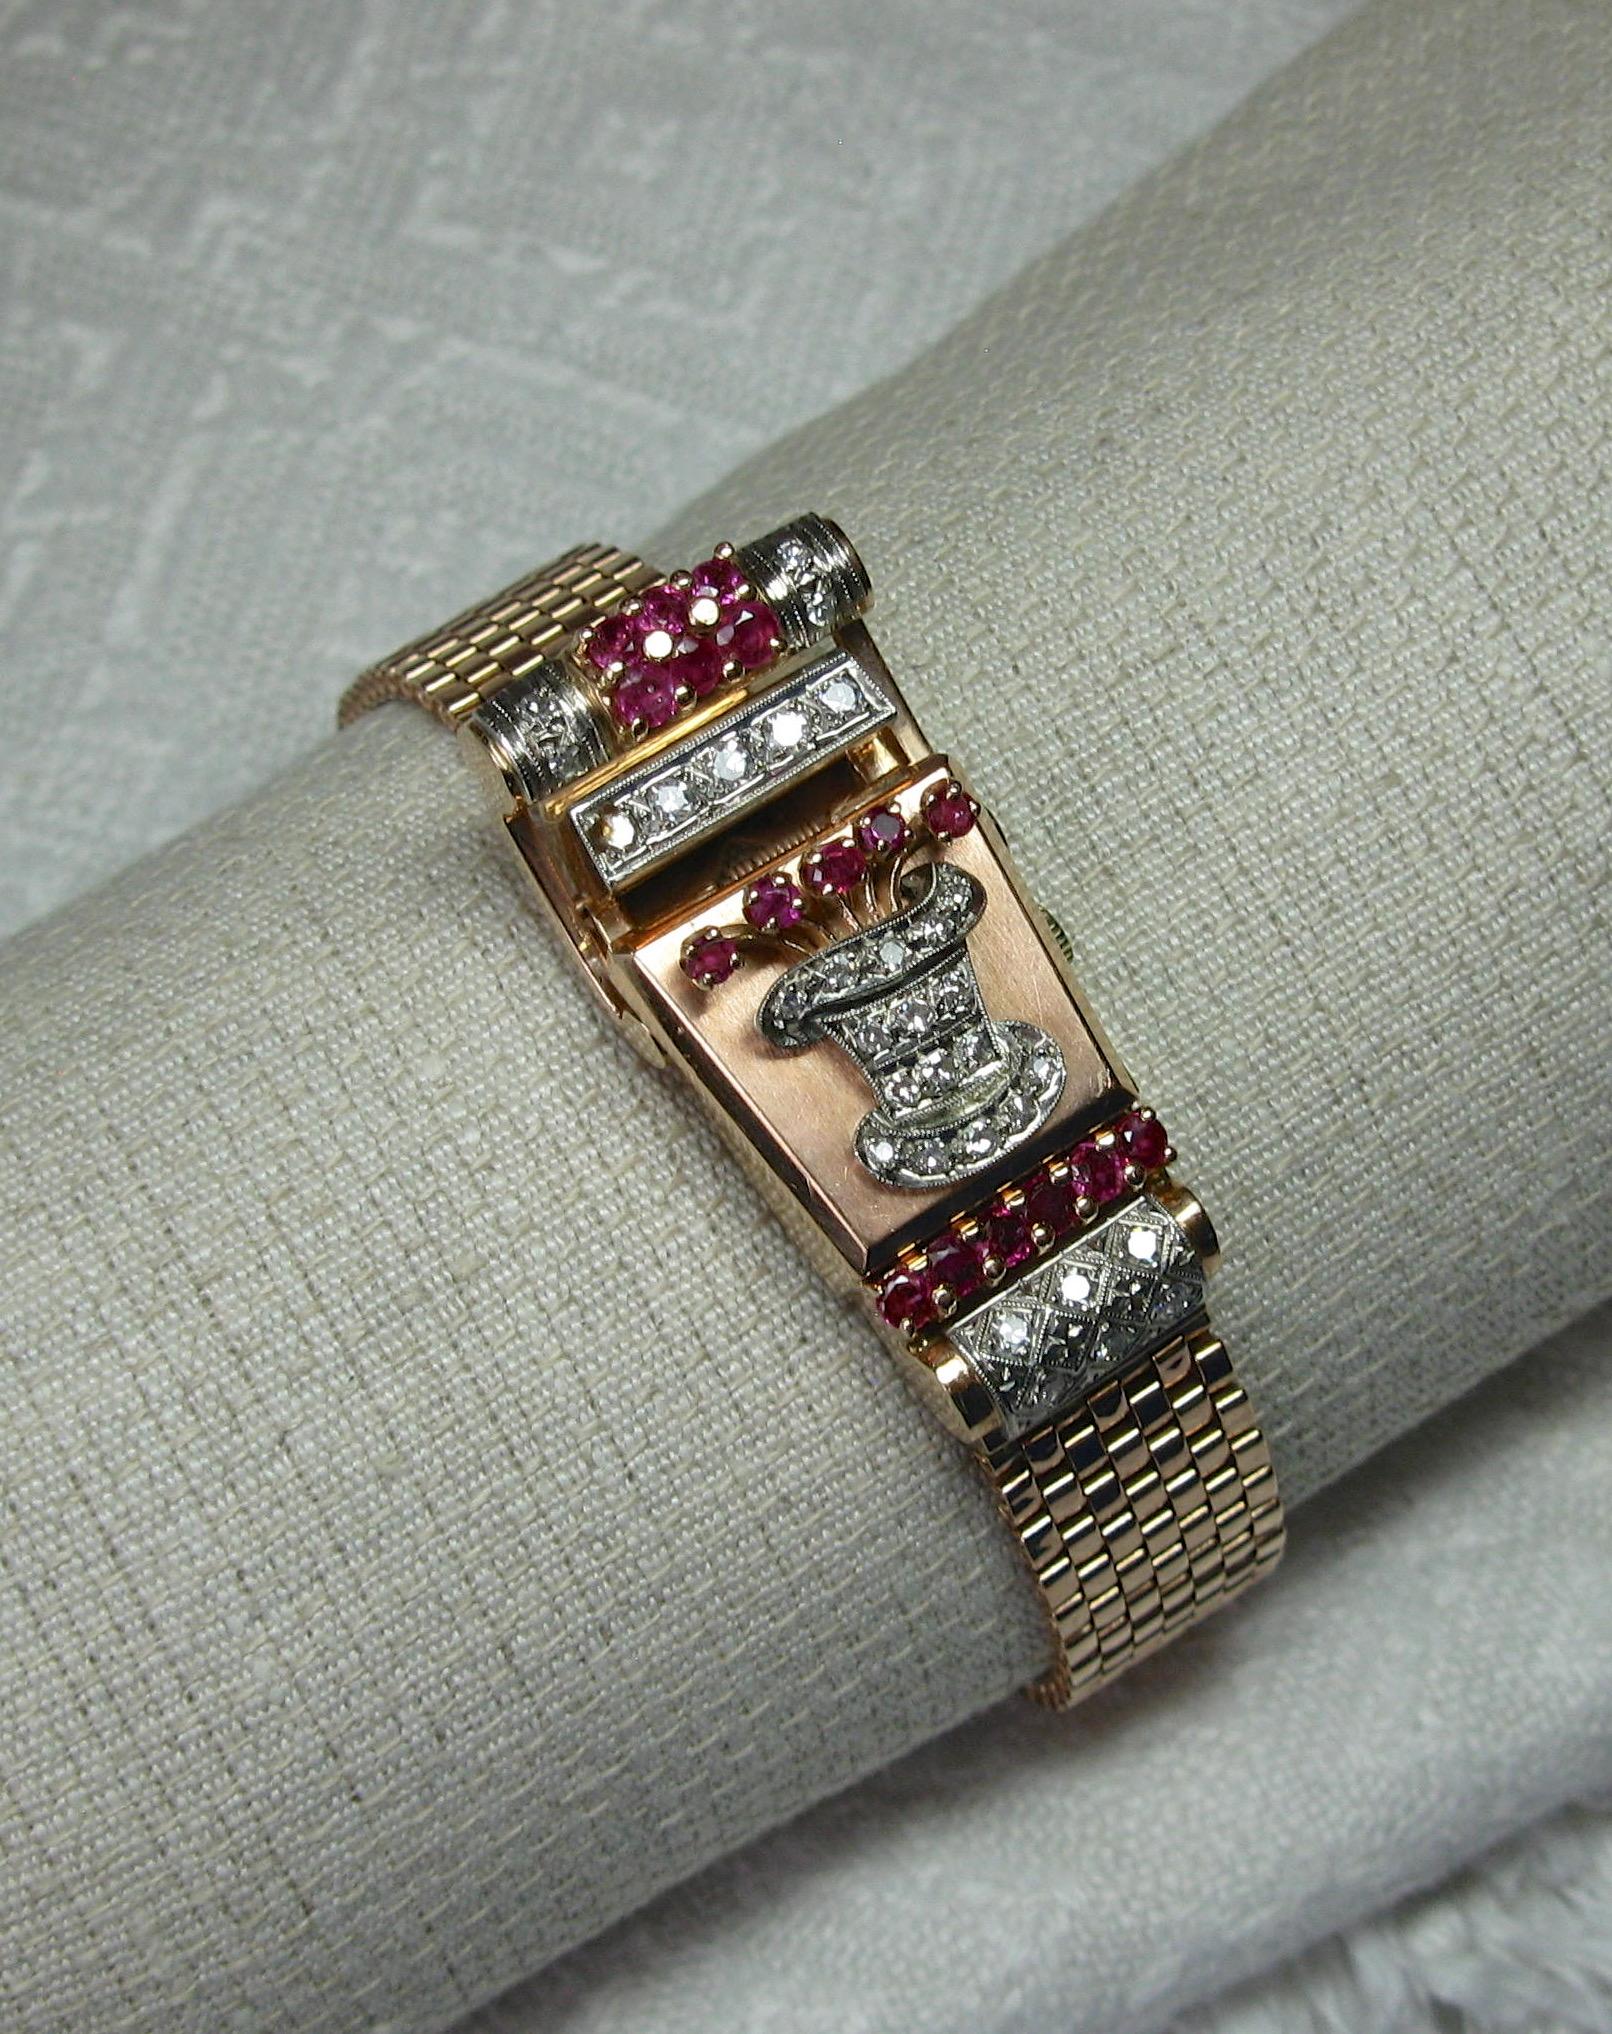 A MUSEUM QUALITY ART DECO RETRO WRISTWATCH BRACELET BY WITTNAUER - IN WORKING ORDER - IN SOLID 14 KARAT ROSE AND WHITE GOLD WITH 31 DIAMONDS AND 17 RUBIES ADORNING THE WATCH CREATING A FLOWER FILLED TOP HAT DESIGN OF EXTRAORDINARY BEAUTY!  THE WATCH